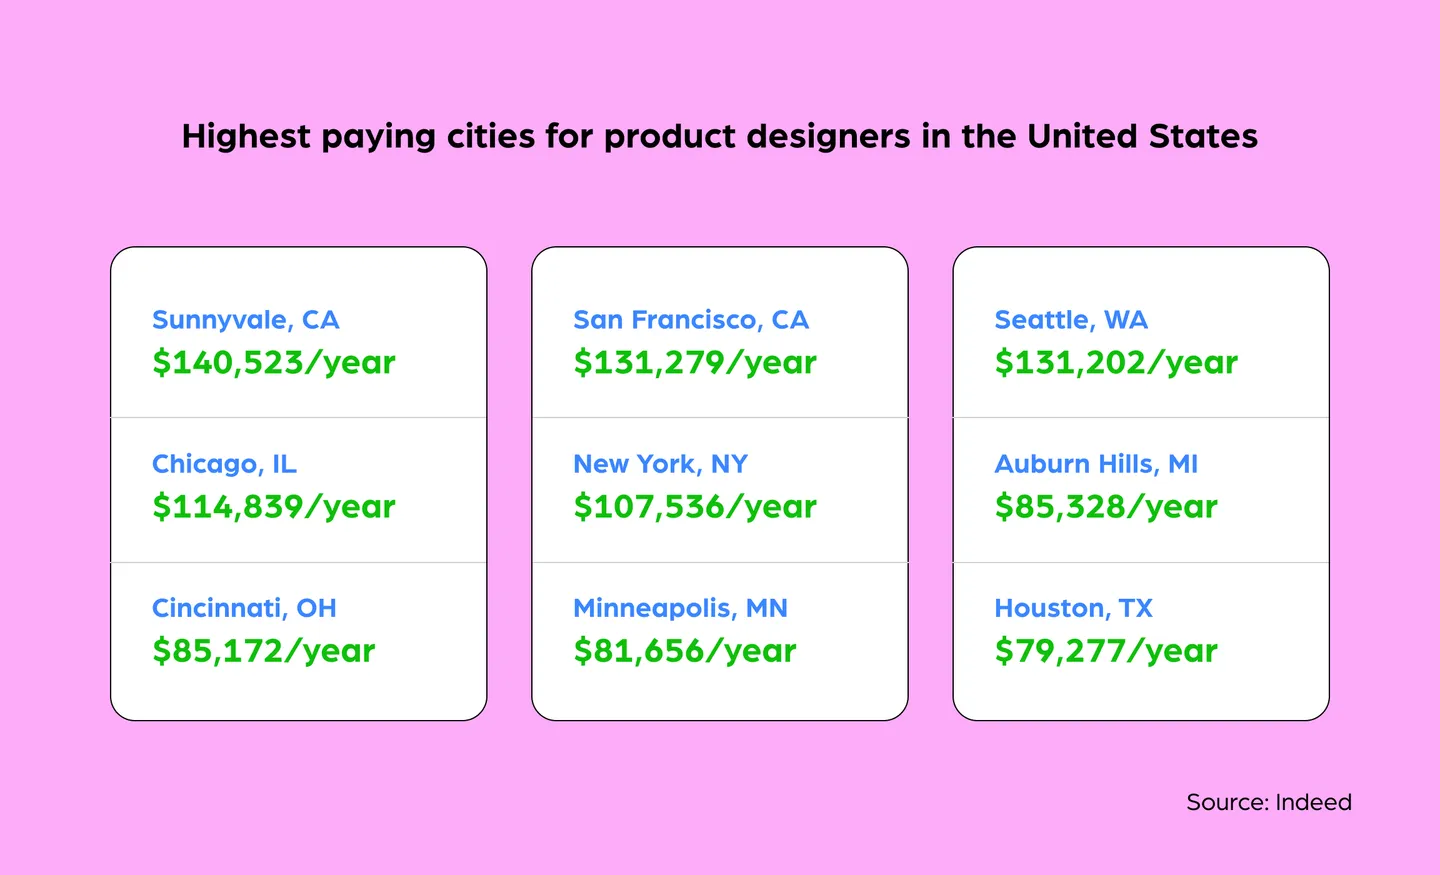 Highest paying cities for product designers. Source: Indeed